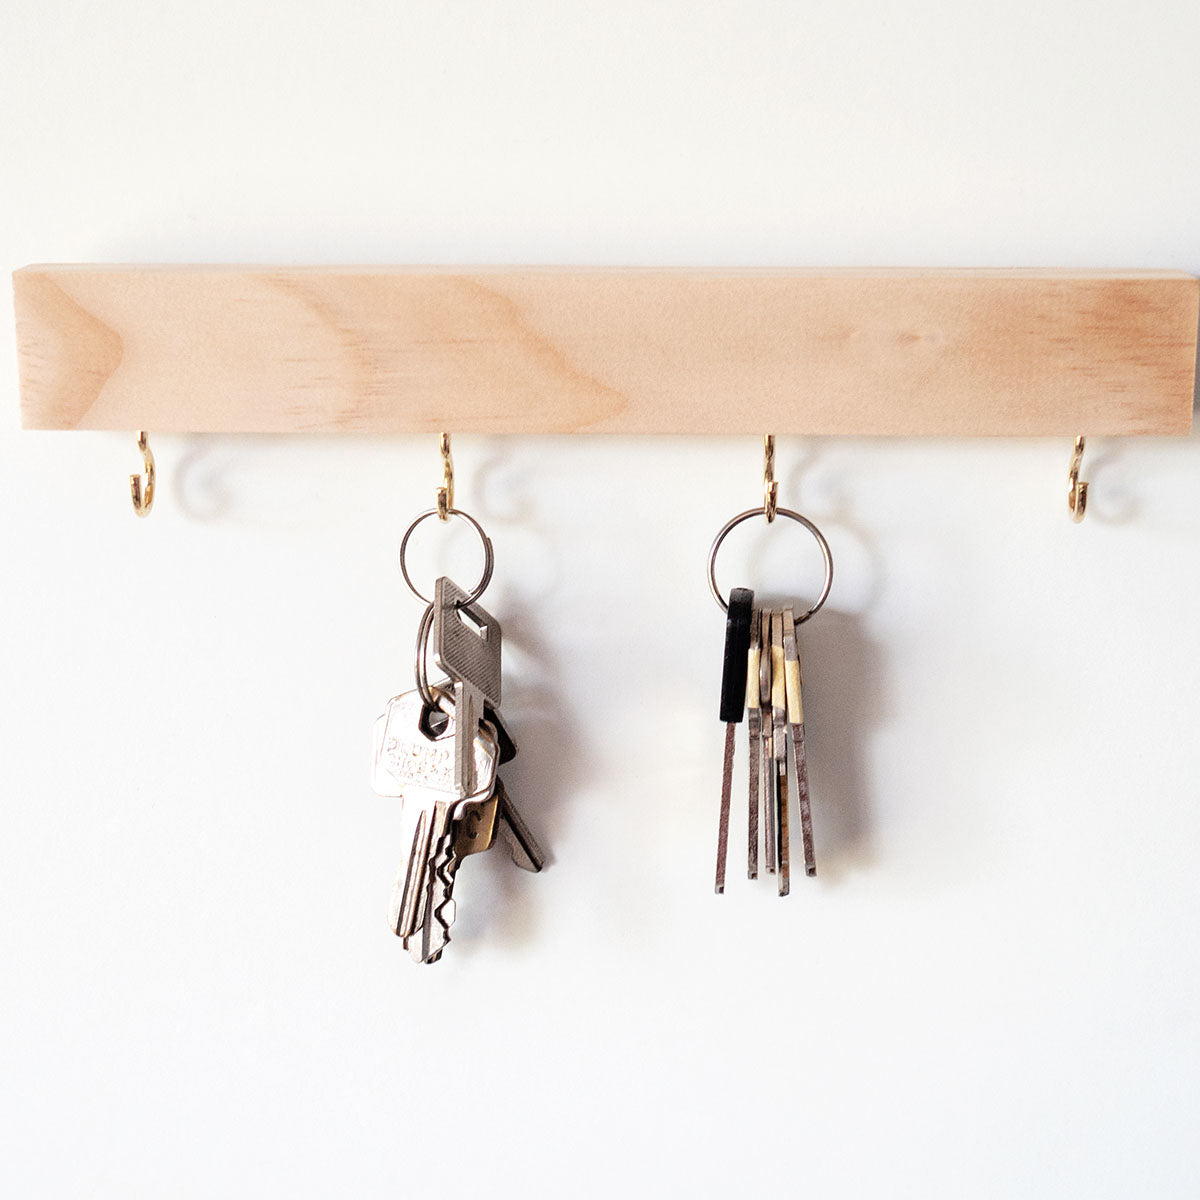 This is a pine wood hook key holder. The hooks are in gold colour